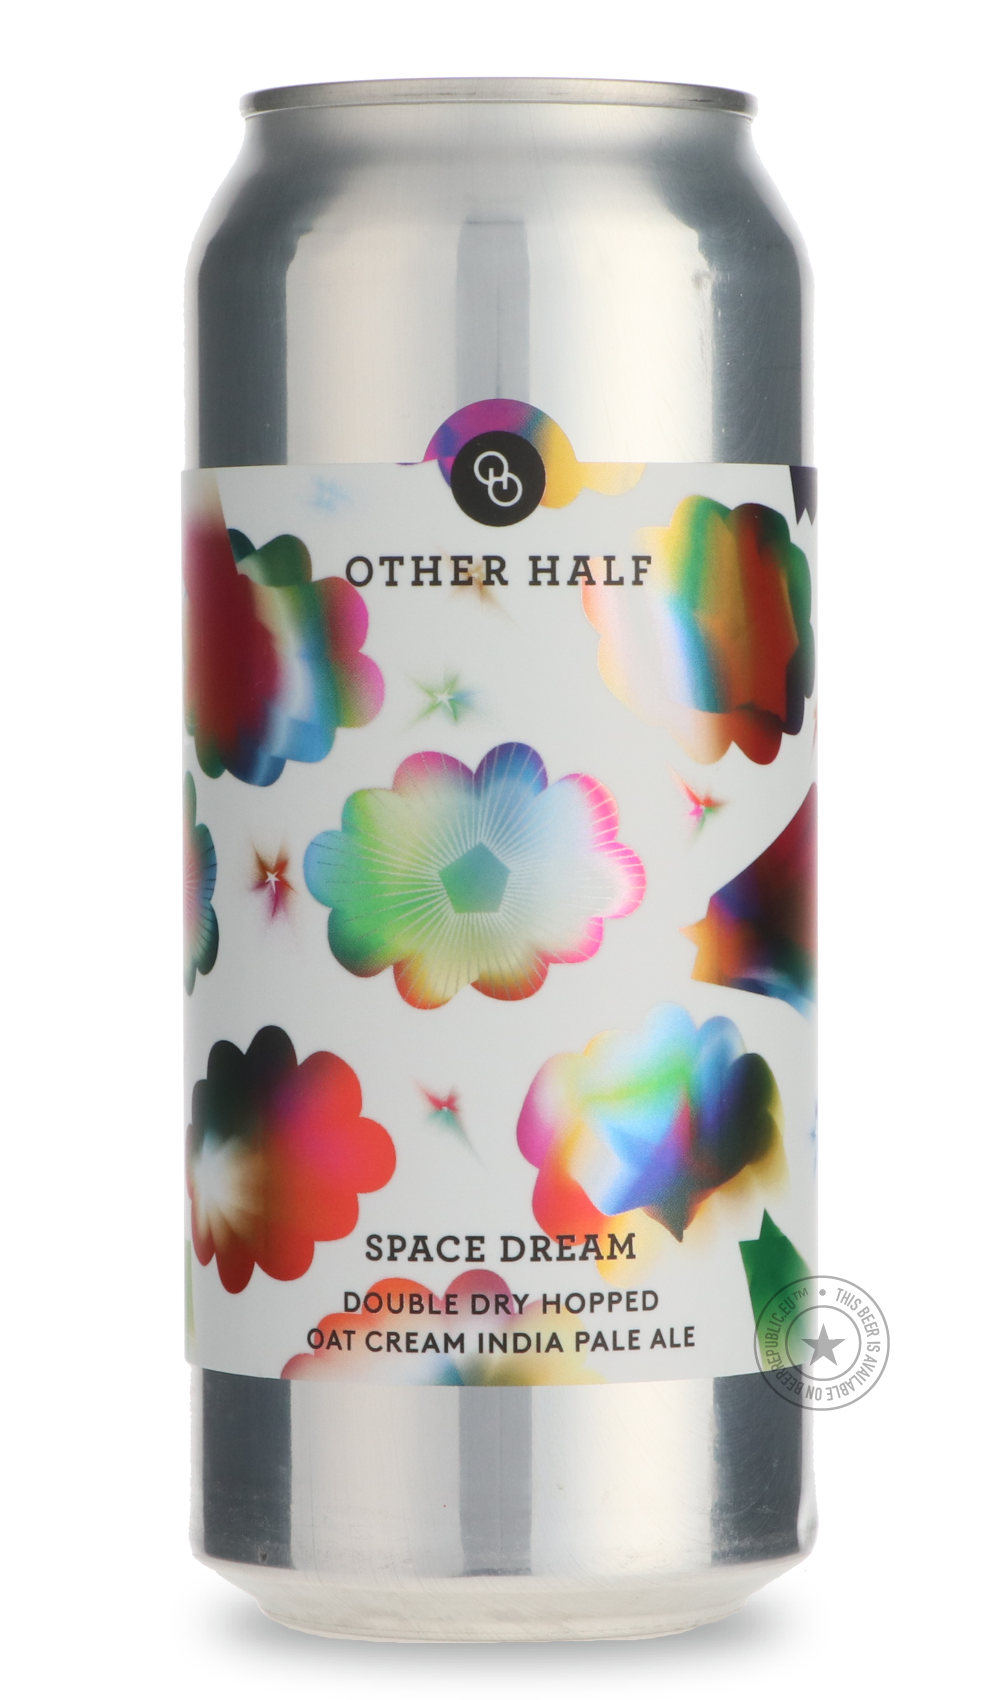 -Other Half- Space Dream-IPA- Only @ Beer Republic - The best online beer store for American & Canadian craft beer - Buy beer online from the USA and Canada - Bier online kopen - Amerikaans bier kopen - Craft beer store - Craft beer kopen - Amerikanisch bier kaufen - Bier online kaufen - Acheter biere online - IPA - Stout - Porter - New England IPA - Hazy IPA - Imperial Stout - Barrel Aged - Barrel Aged Imperial Stout - Brown - Dark beer - Blond - Blonde - Pilsner - Lager - Wheat - Weizen - Amber - Barley W